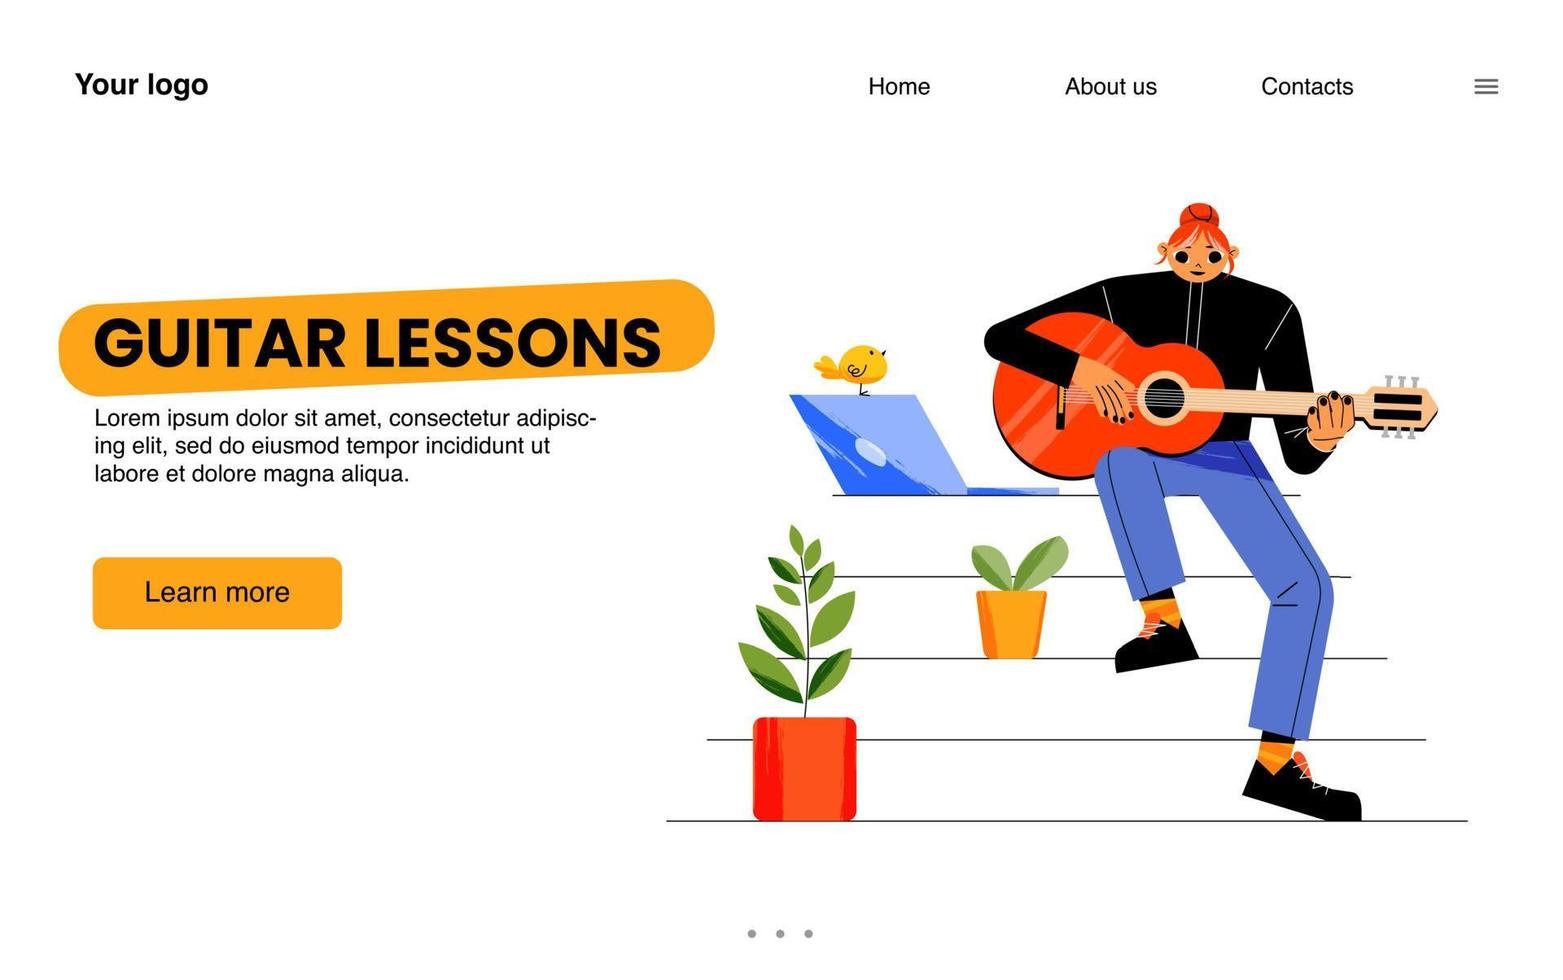 Guitar lessons landing page, online education vector